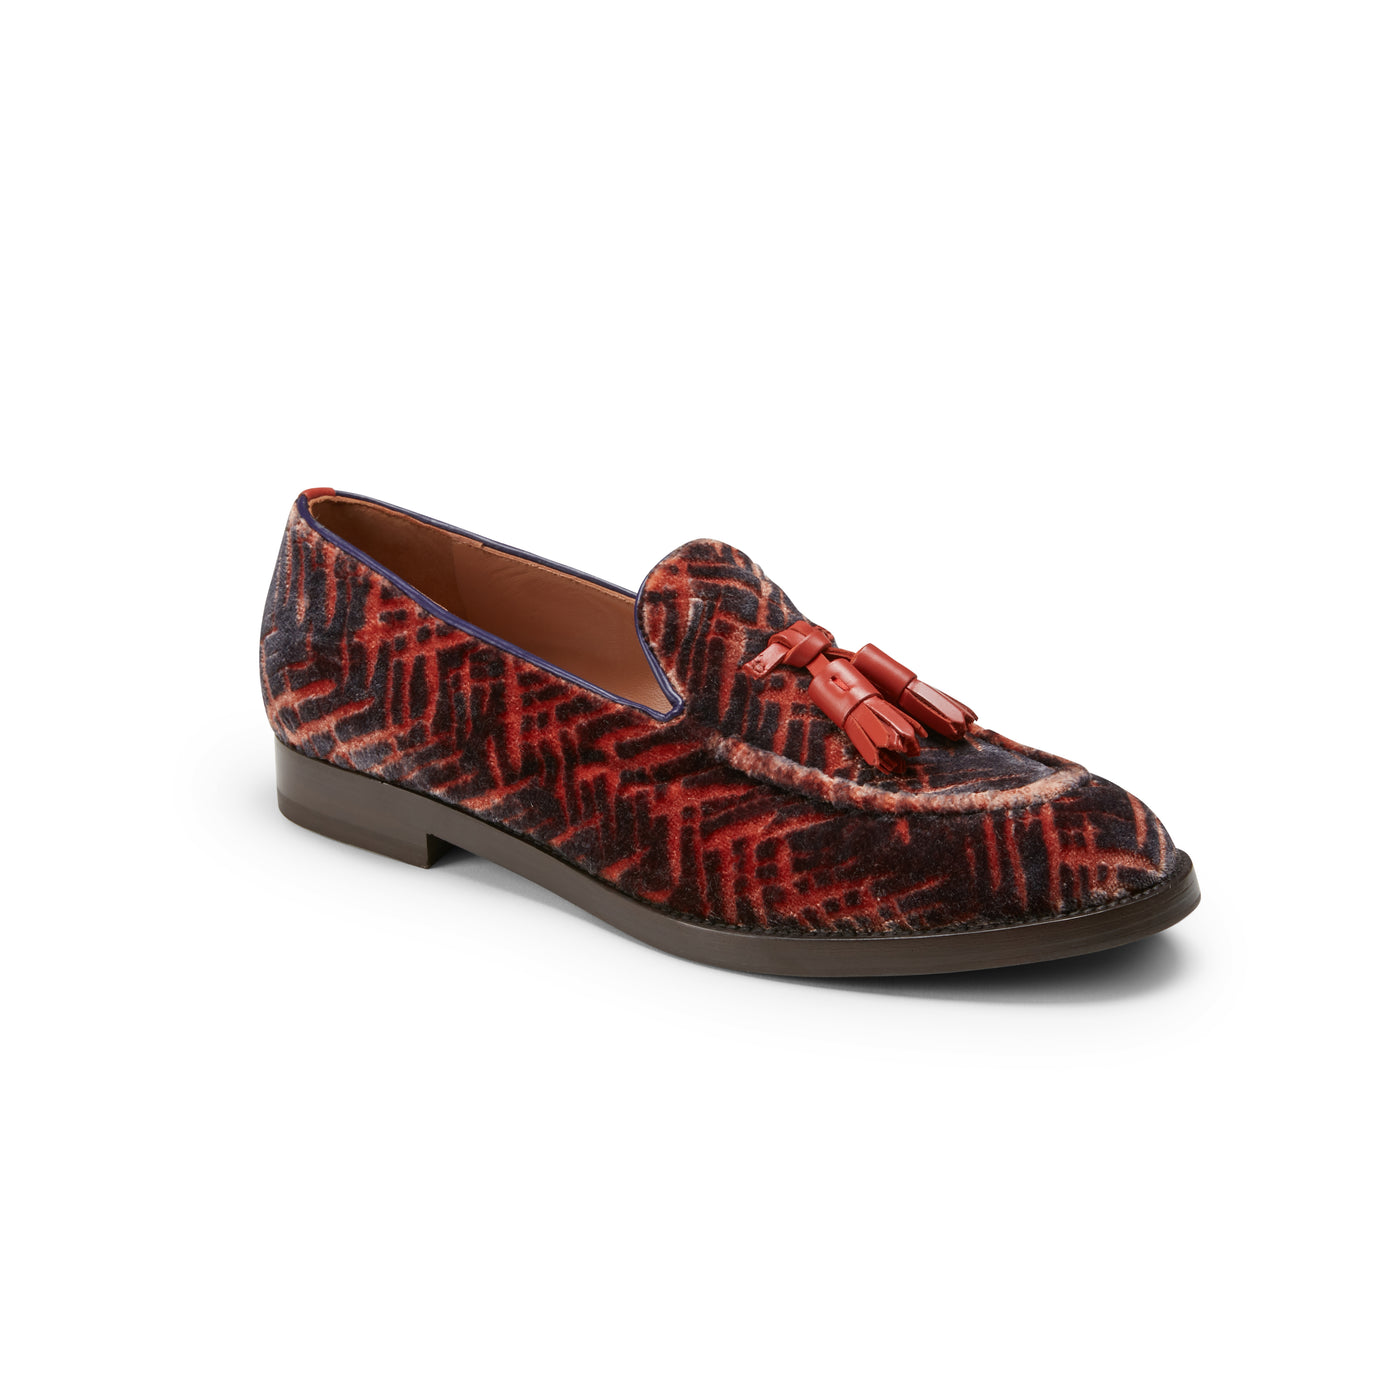 Shop The Latest Collection Of Fratelli Rossetti Woman Brera Loafer 67094 In Lebanon